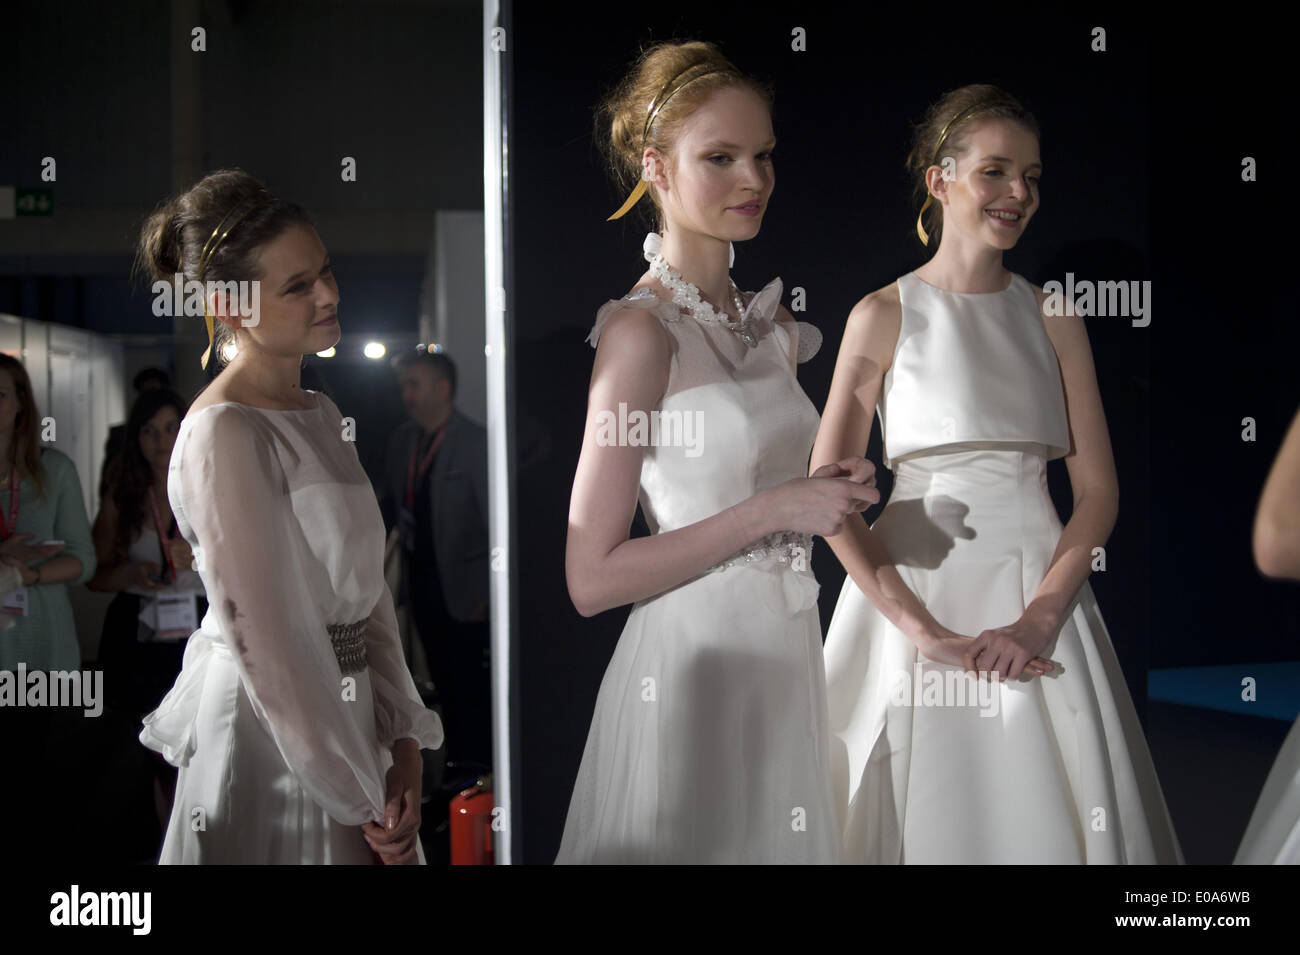 Barcelona, Spain. 7th May, 2014.   Models dressed as brides wait at the backstage corridors before going on catwalk. Barcelona Bridal Week is a fashion industry event that includes Gaudi Novias (brides) Catwalk. Credit:  Jordi Boixareu/ZUMA Wire/ZUMAPRESS.com/Alamy Live News Stock Photo